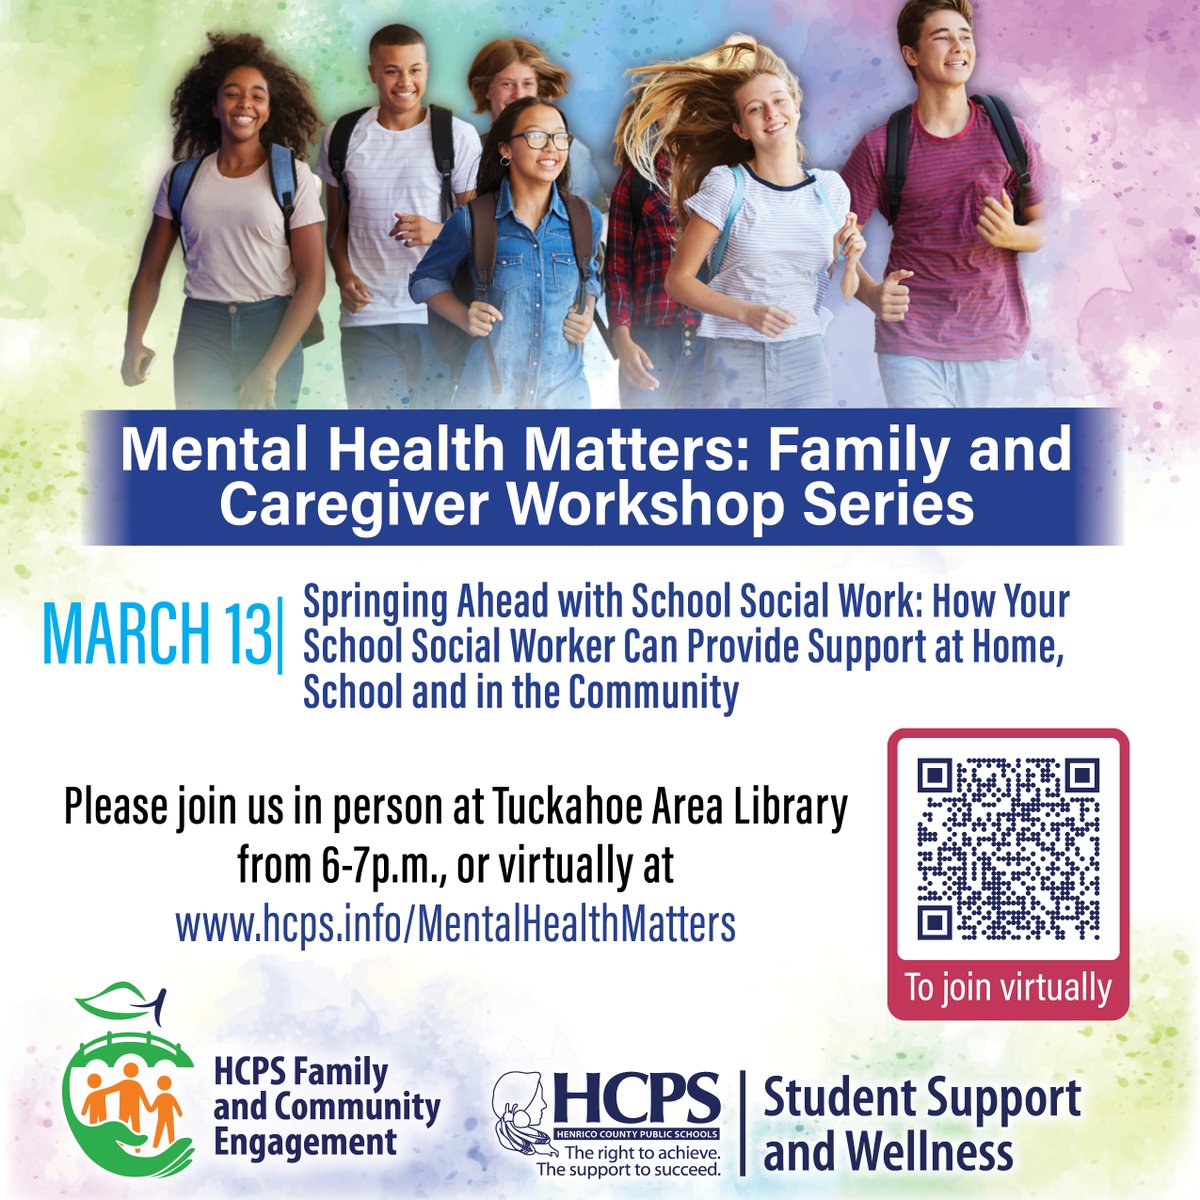 There's no better time to learn about HCPS social workers than Social Work Month! 🙌 Join us Wednesday at Tuckahoe Area Library at 6 p.m. for 'Springing Ahead With School Social Work.' Can't attend in person? You can also join virtually at hcps.info/MentalHealthMa….